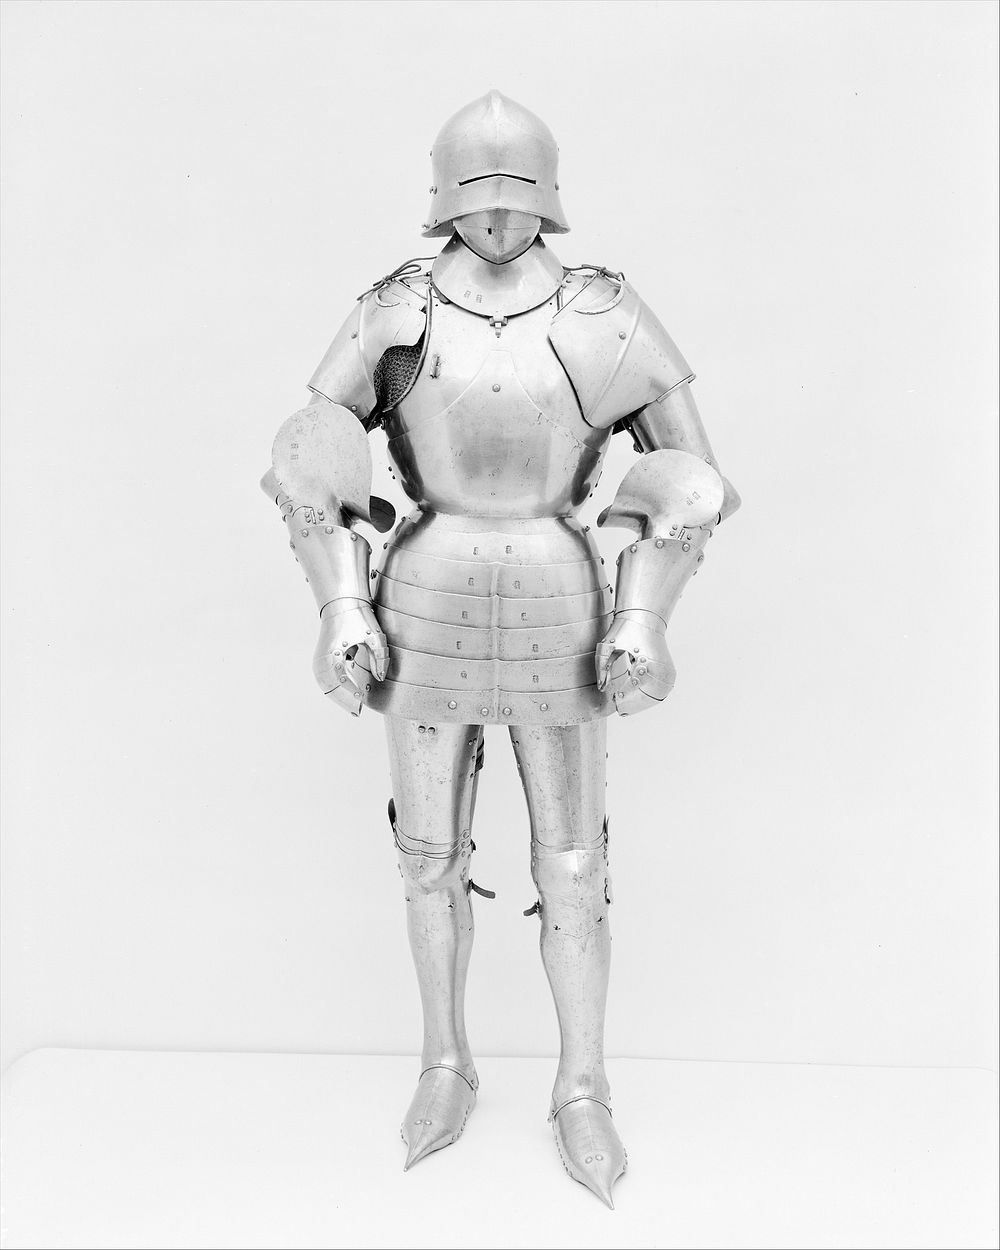 Armor in the style of the 15th century